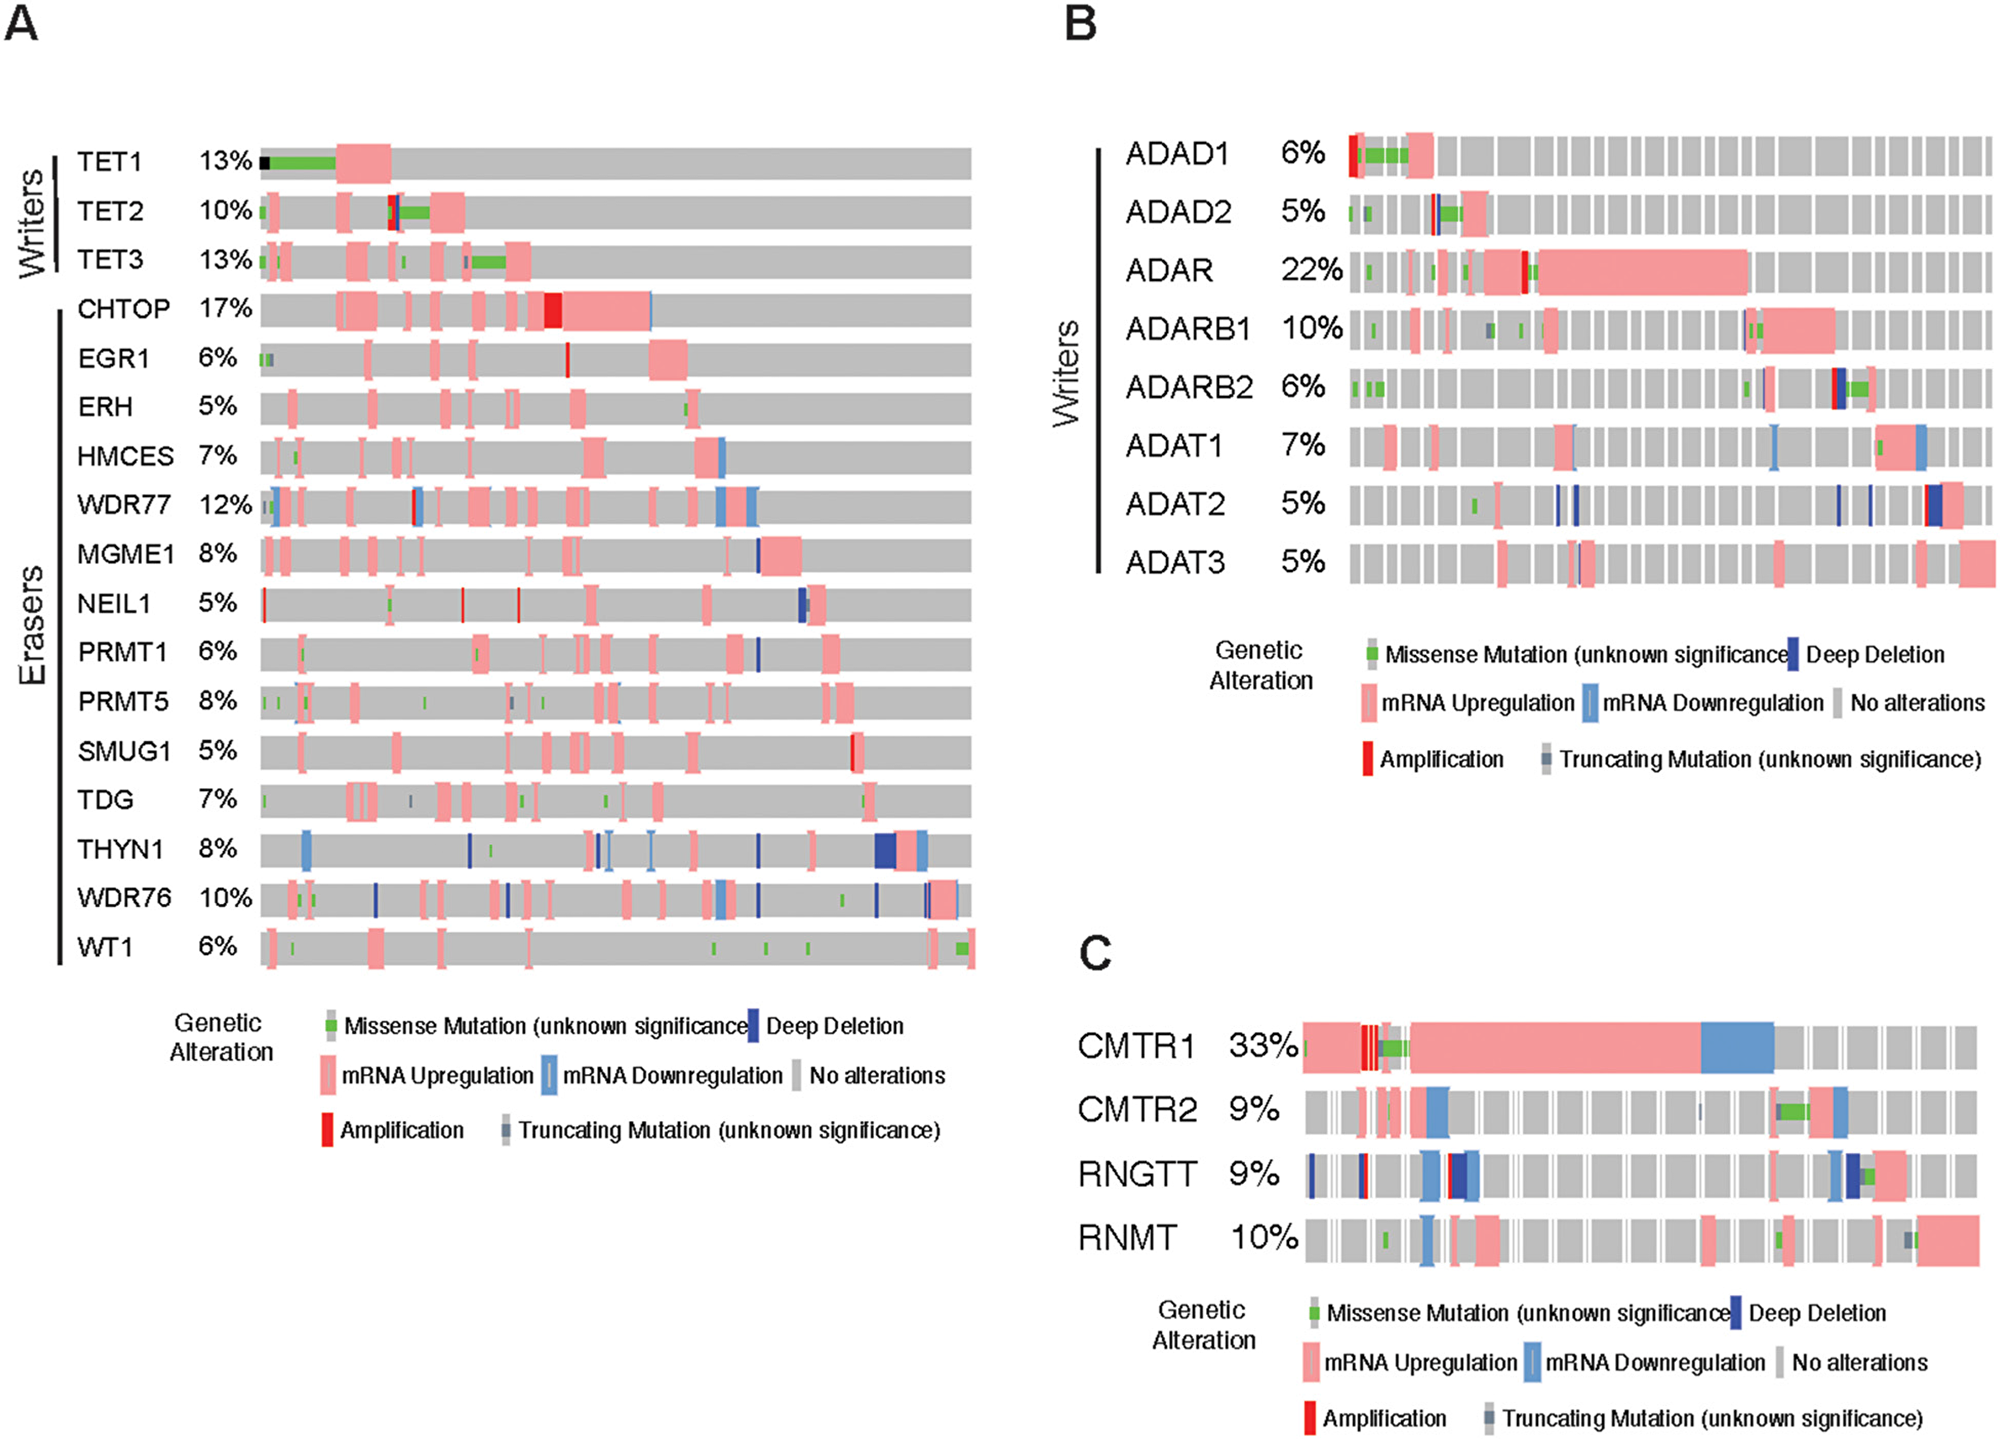 Analysis of hm5C, Inosine and other RNA modification regulatory proteins in melanoma.